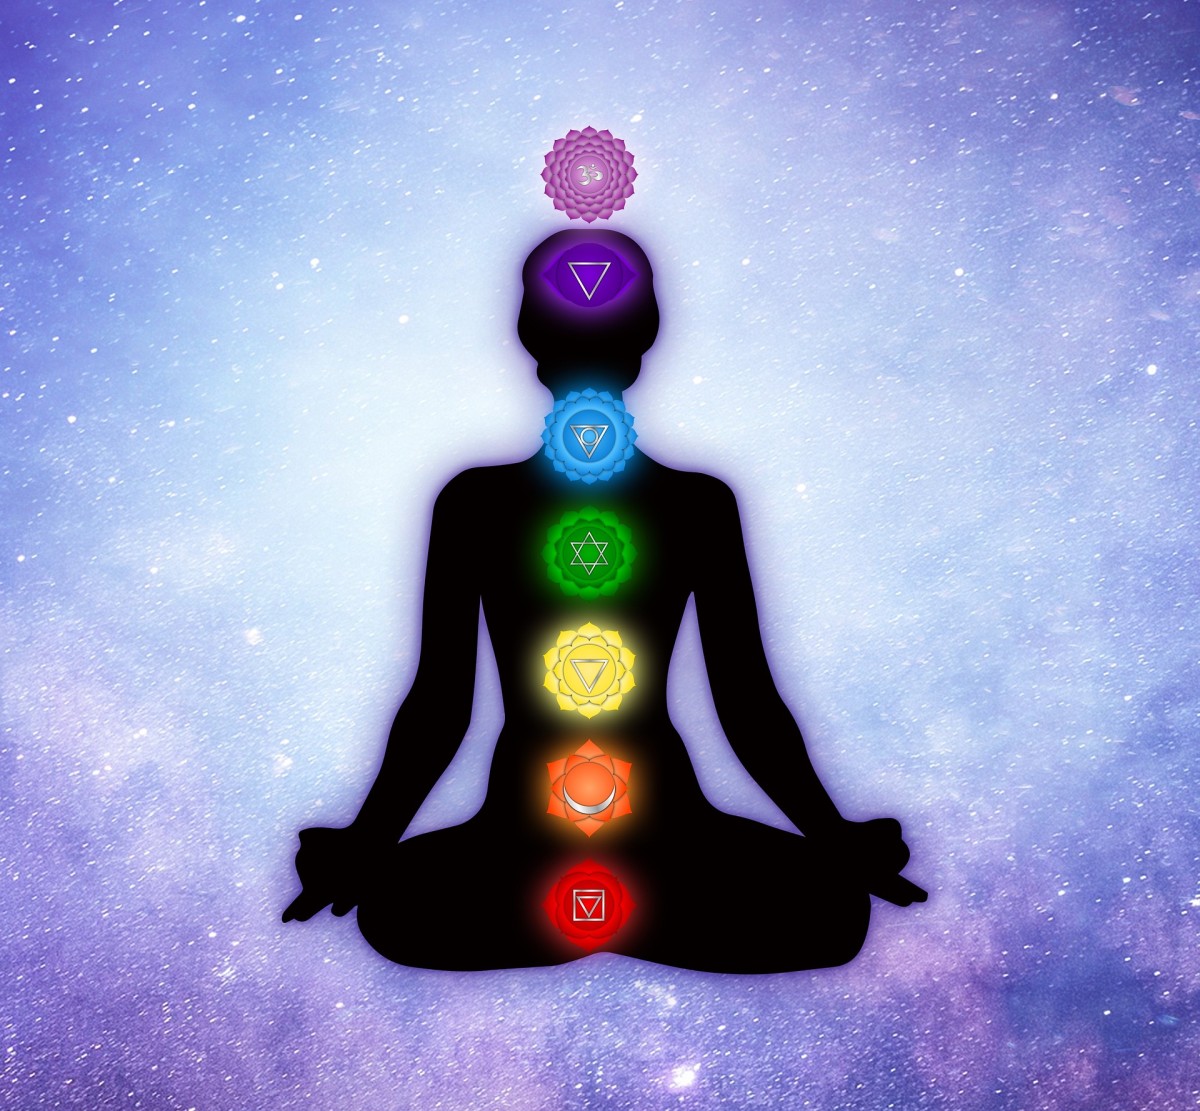 Chakras are energy centers located in your subtle body. 